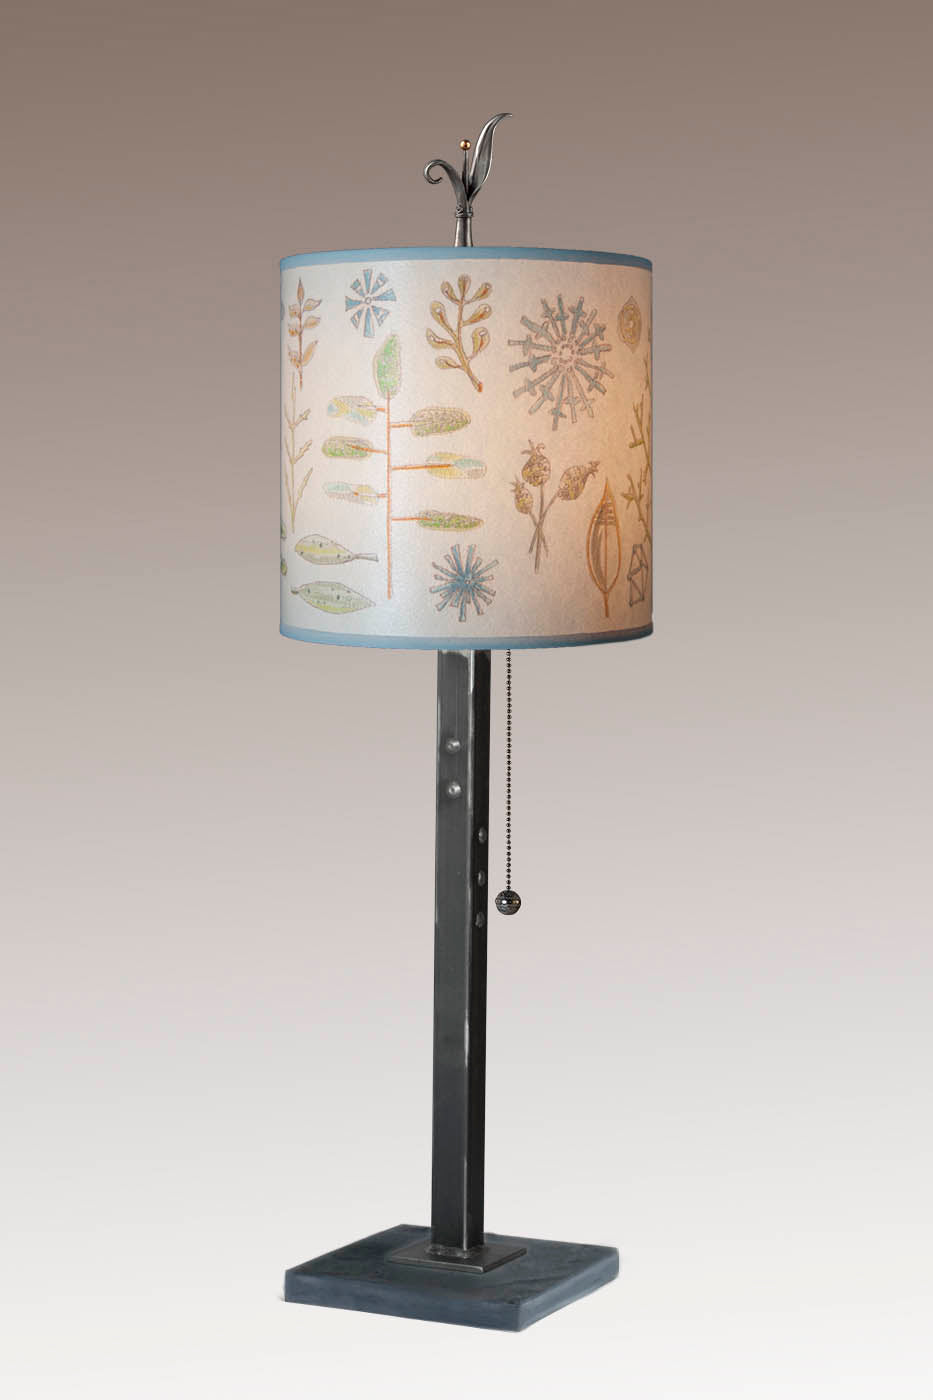 Janna Ugone &amp; Co Table Lamp Steel Table Lamp Medium Drum Shade in Field Chart